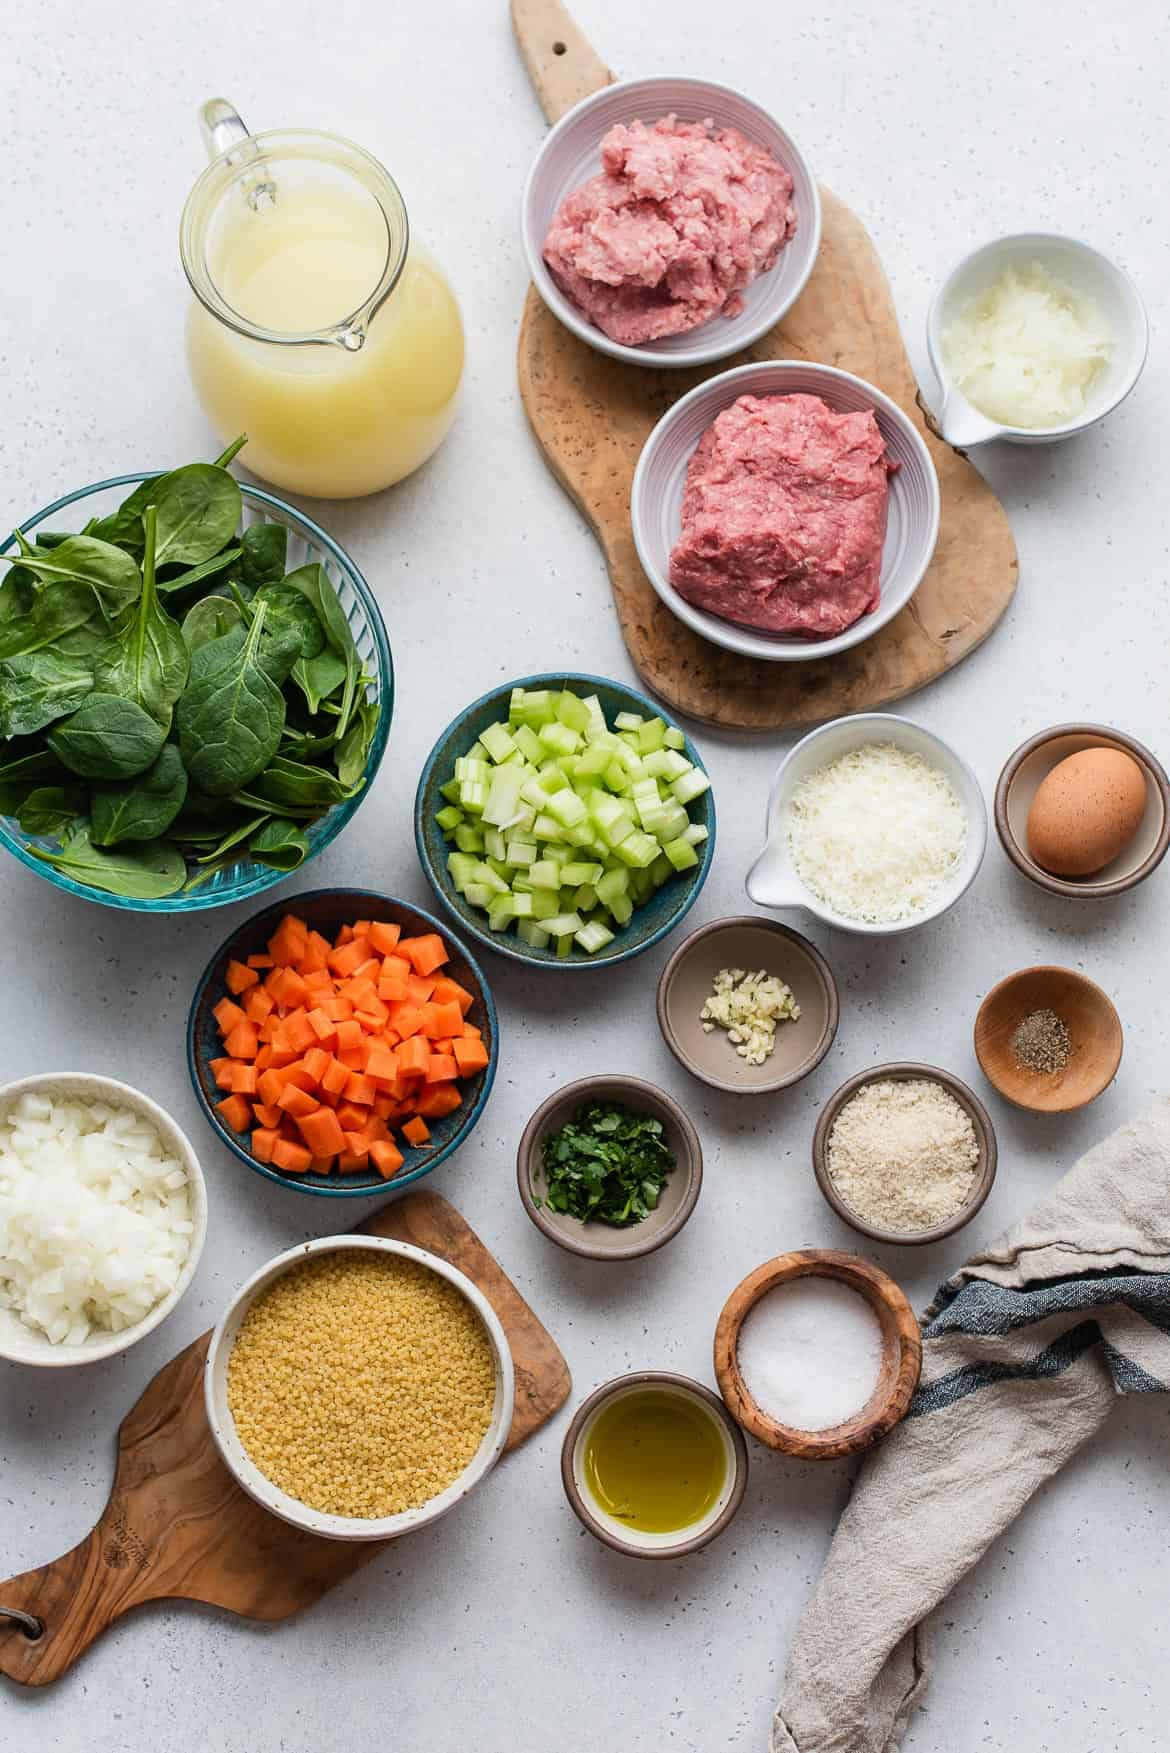 Ingredients for Italian Wedding Soup arranged in variety of small bowls including: chopped onion, carrots, celery, meat, and seasonings.